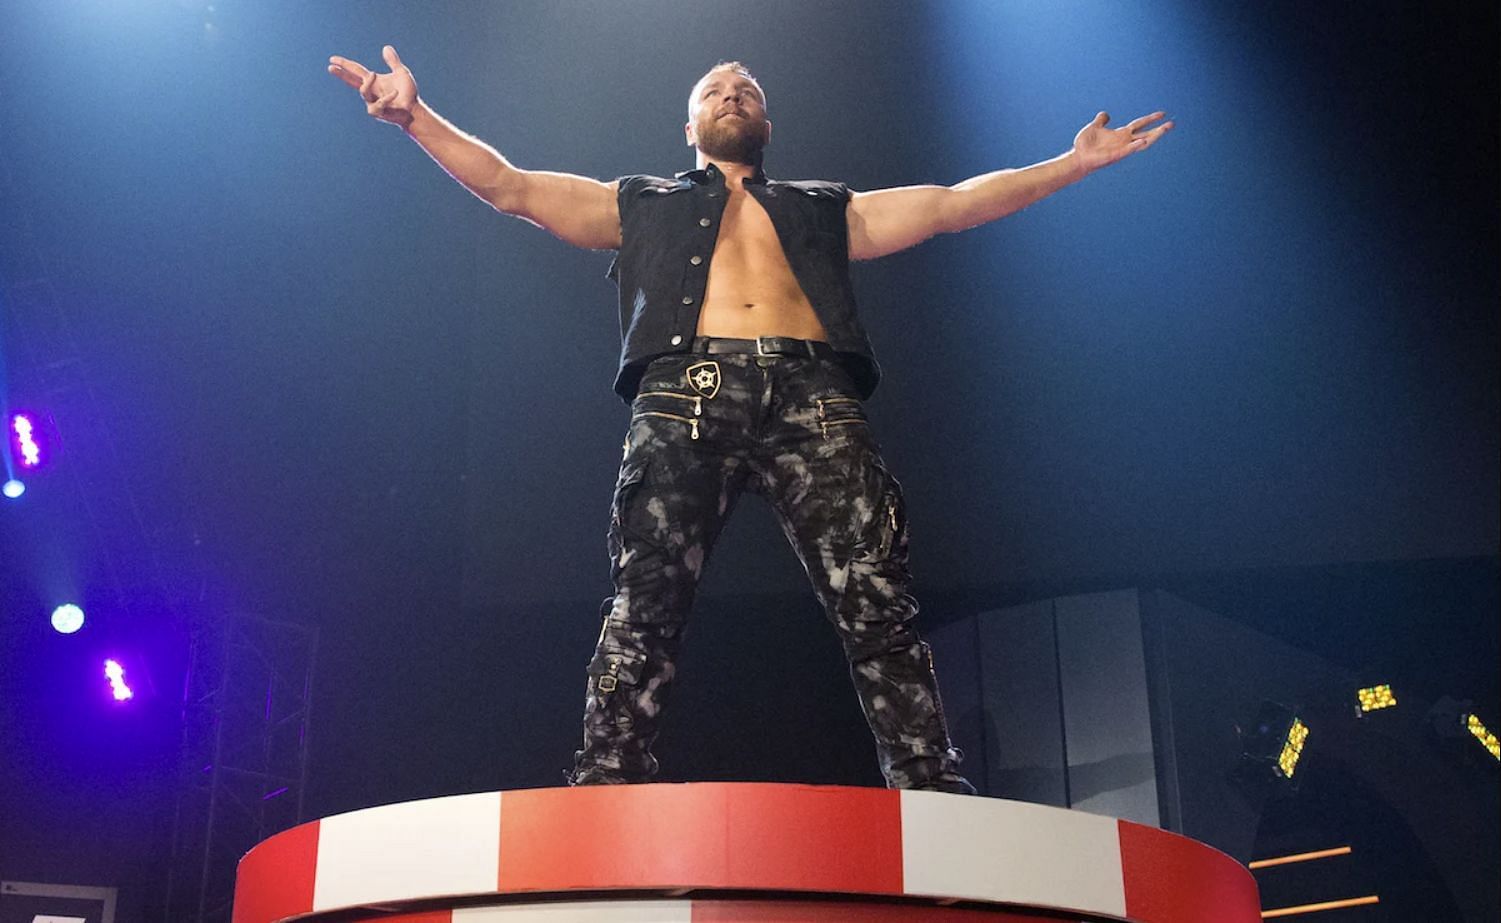 Jon Moxley stands tall at Double or Nothing